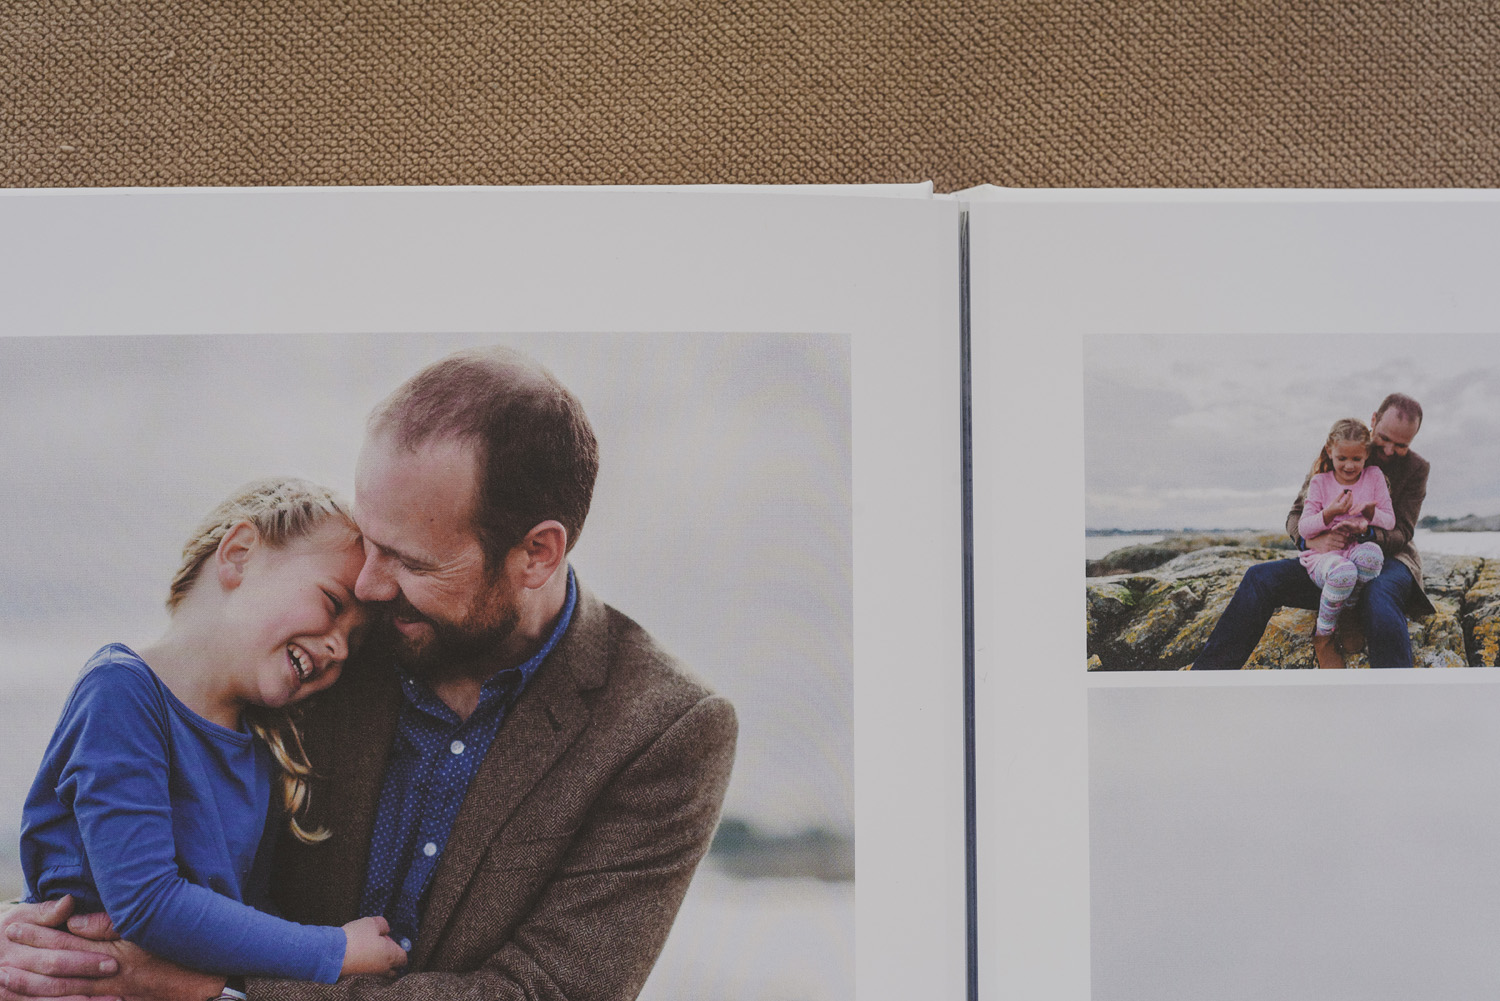 beautiful family photo book-dad snuggling young daughter at beach